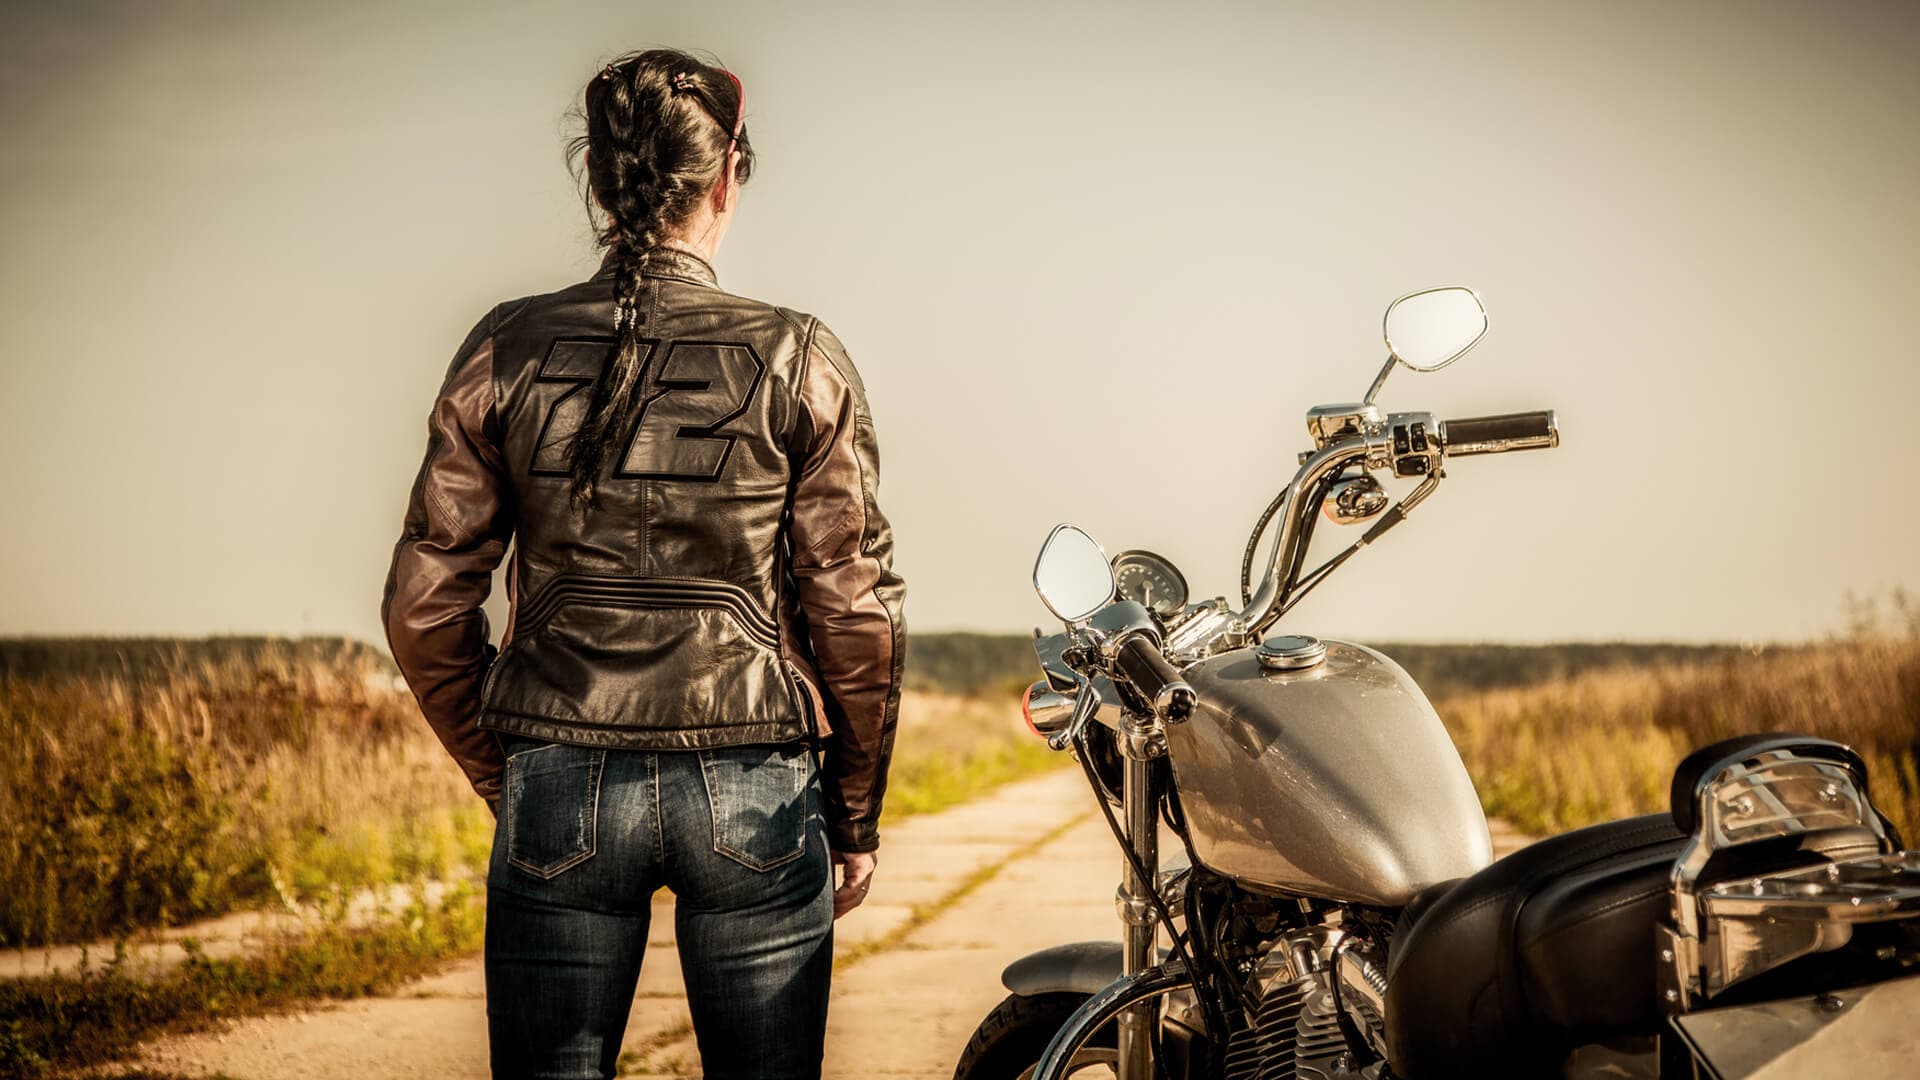 Zip Up in the Best Motorcycle Jackets You Can Buy